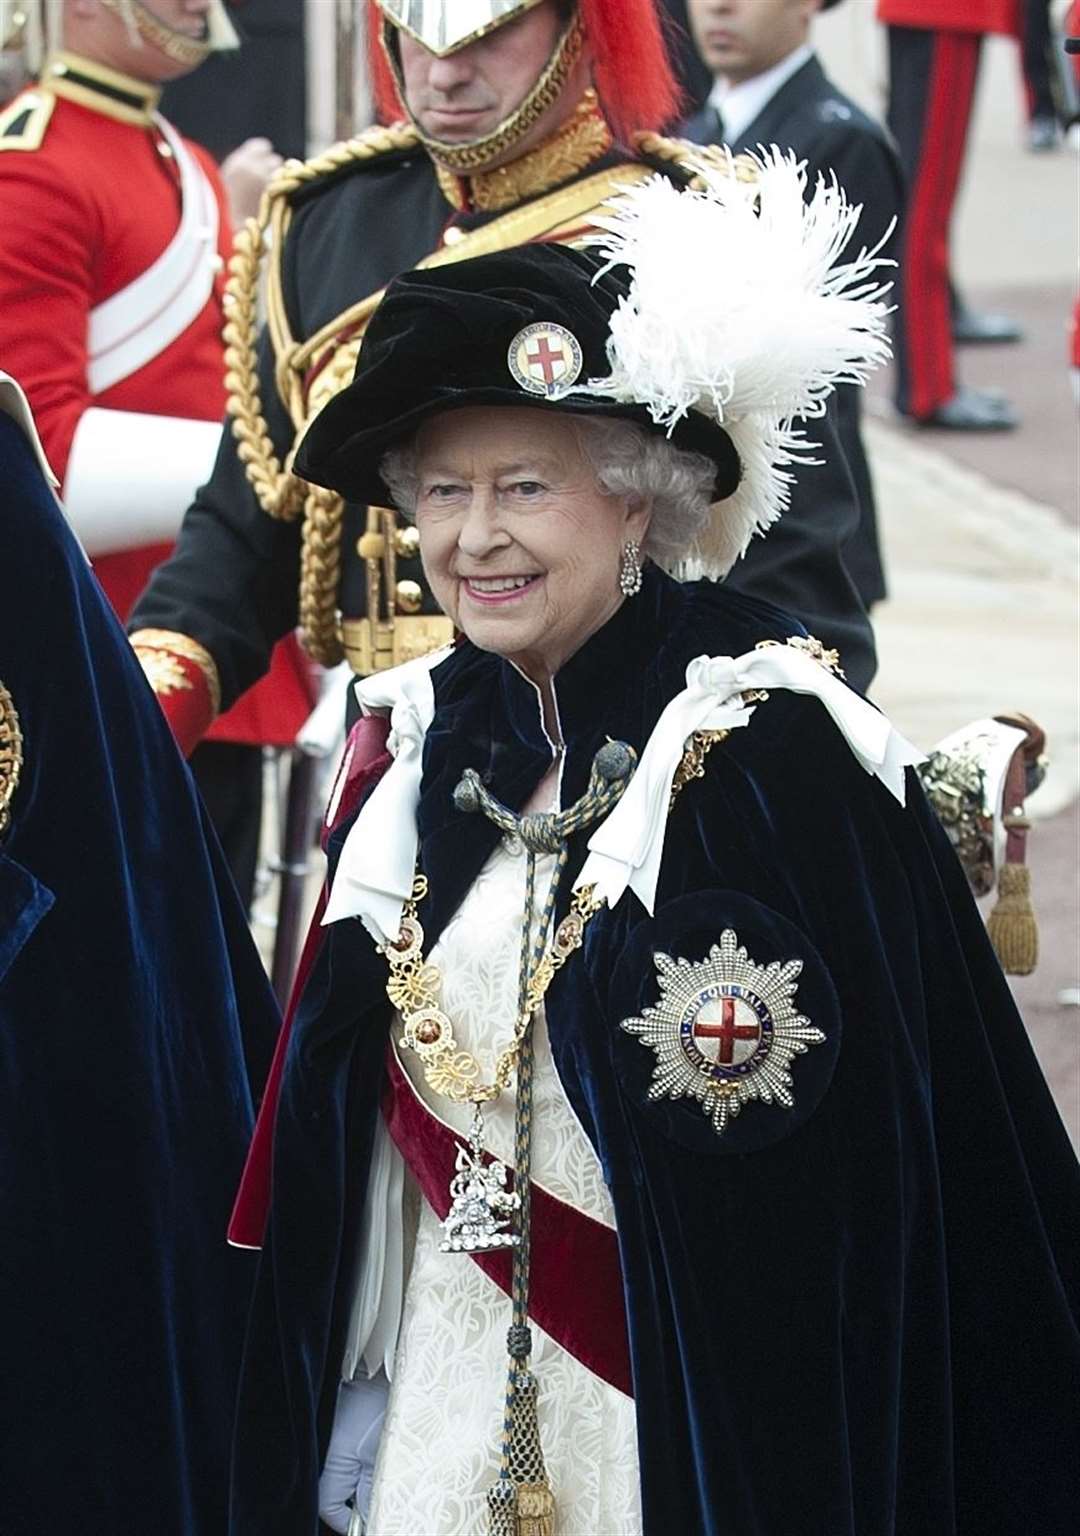 Queen Elizabeth II at an annual Garter Ceremony at Windsor Castle (Murray Sunders/Daily Mail/PA)